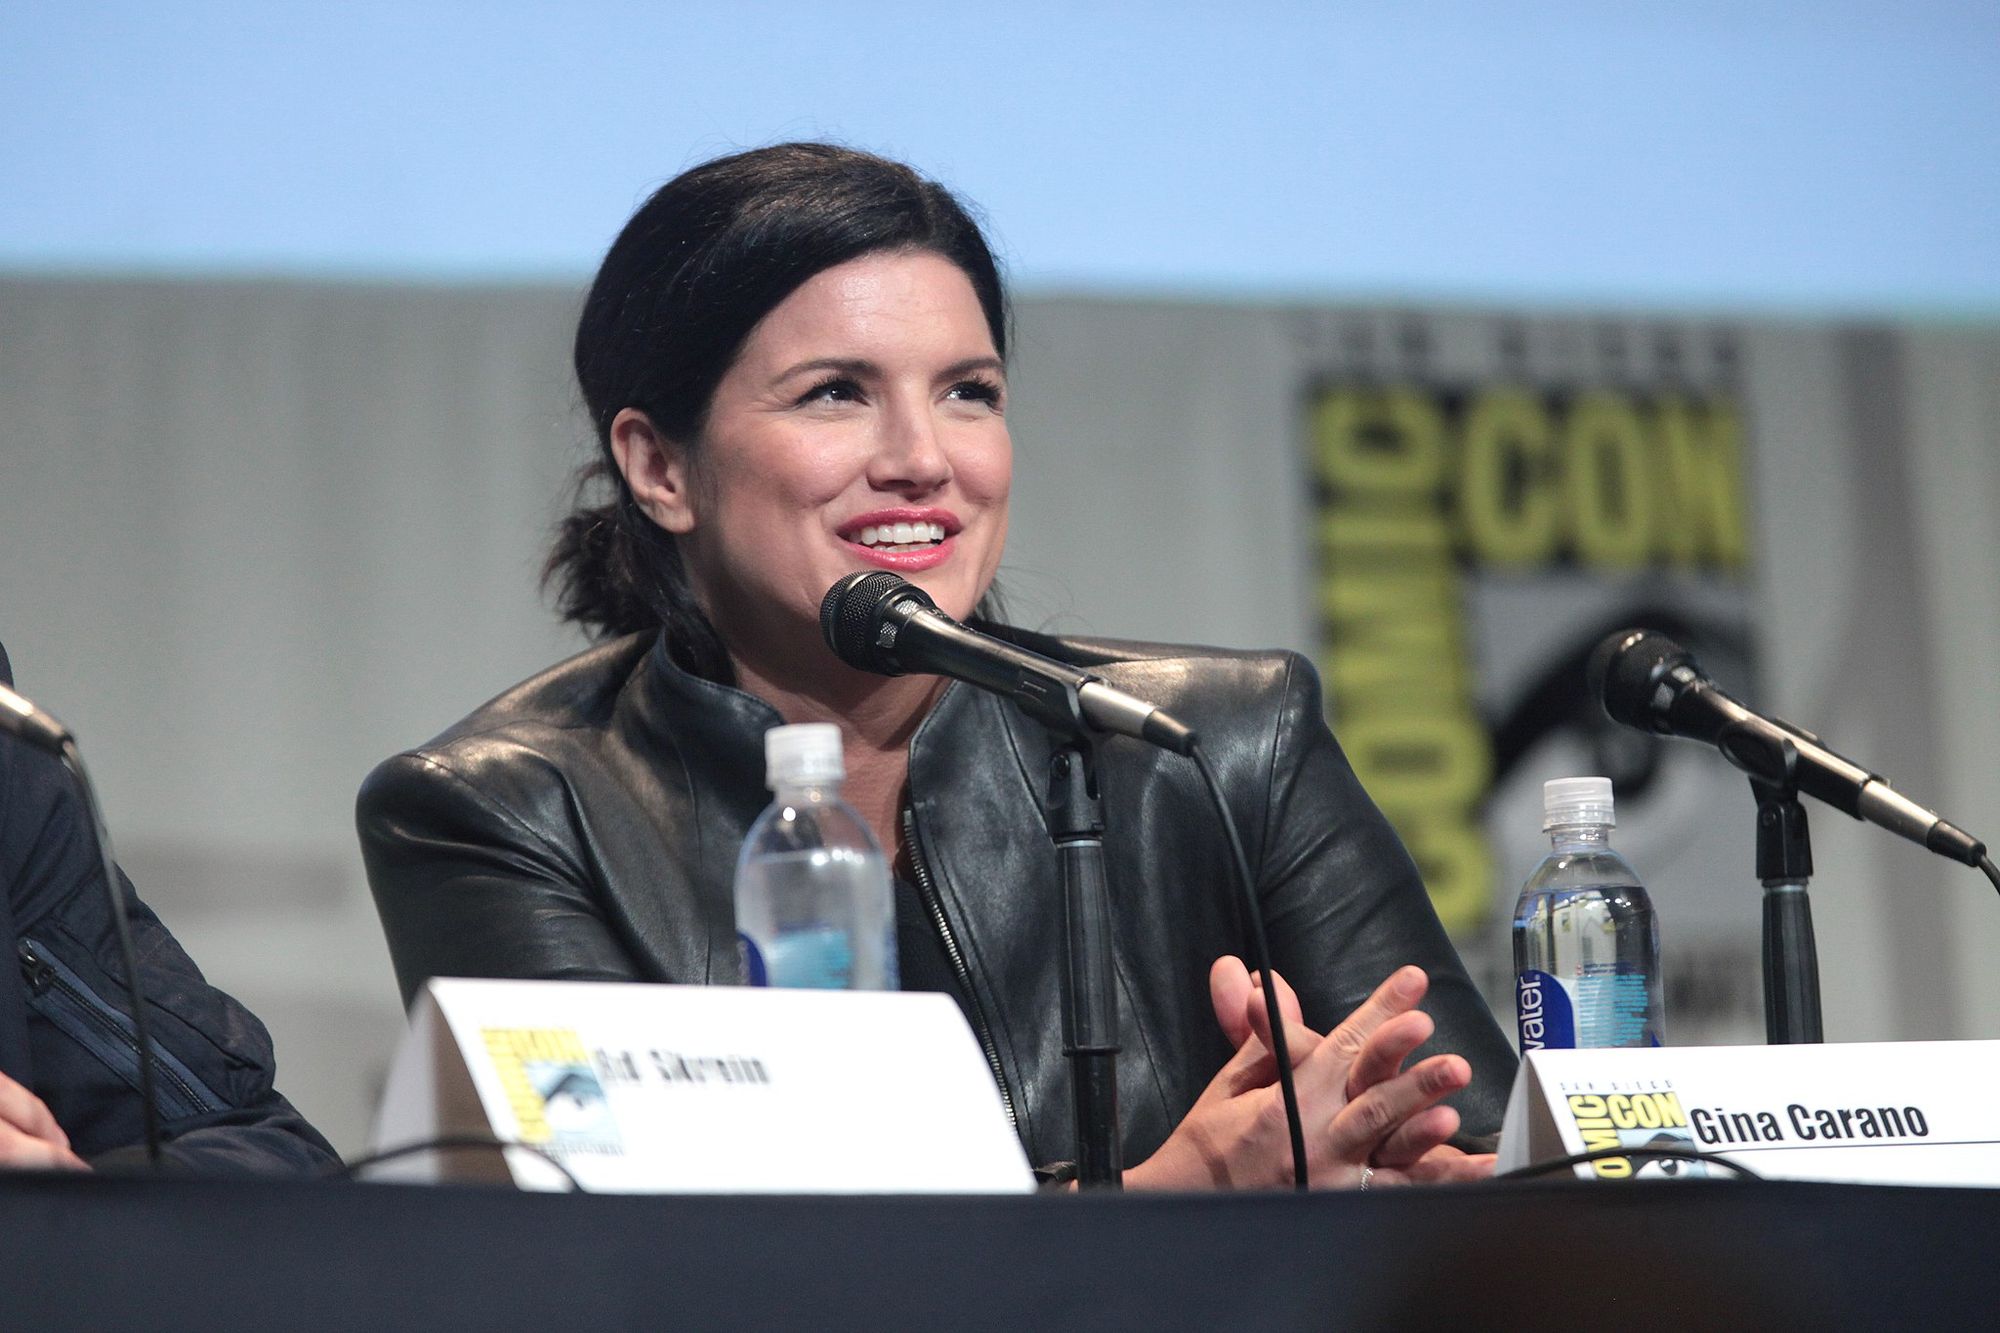 New Gina Carano Film Announced With The Daily Wire